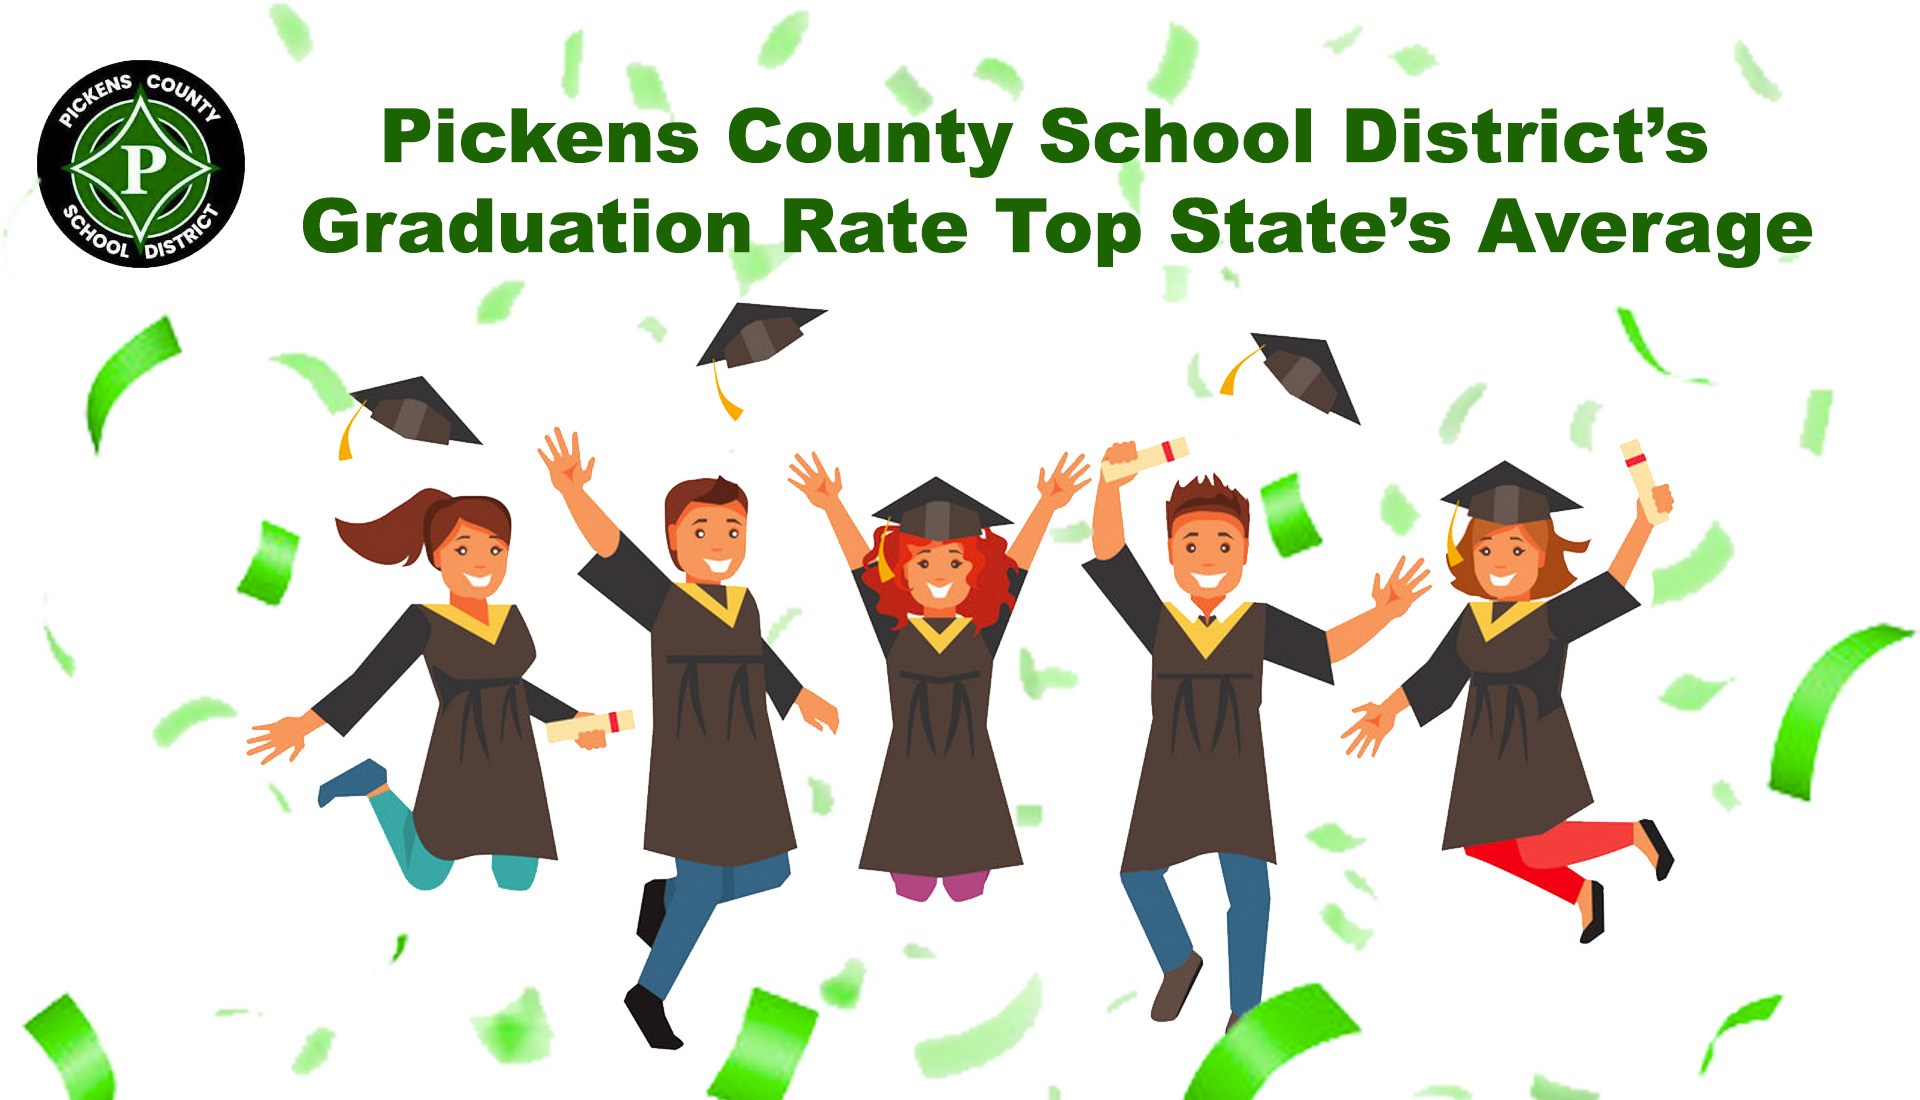 Pickens County School District’s Graduation Rate Top State’s Average